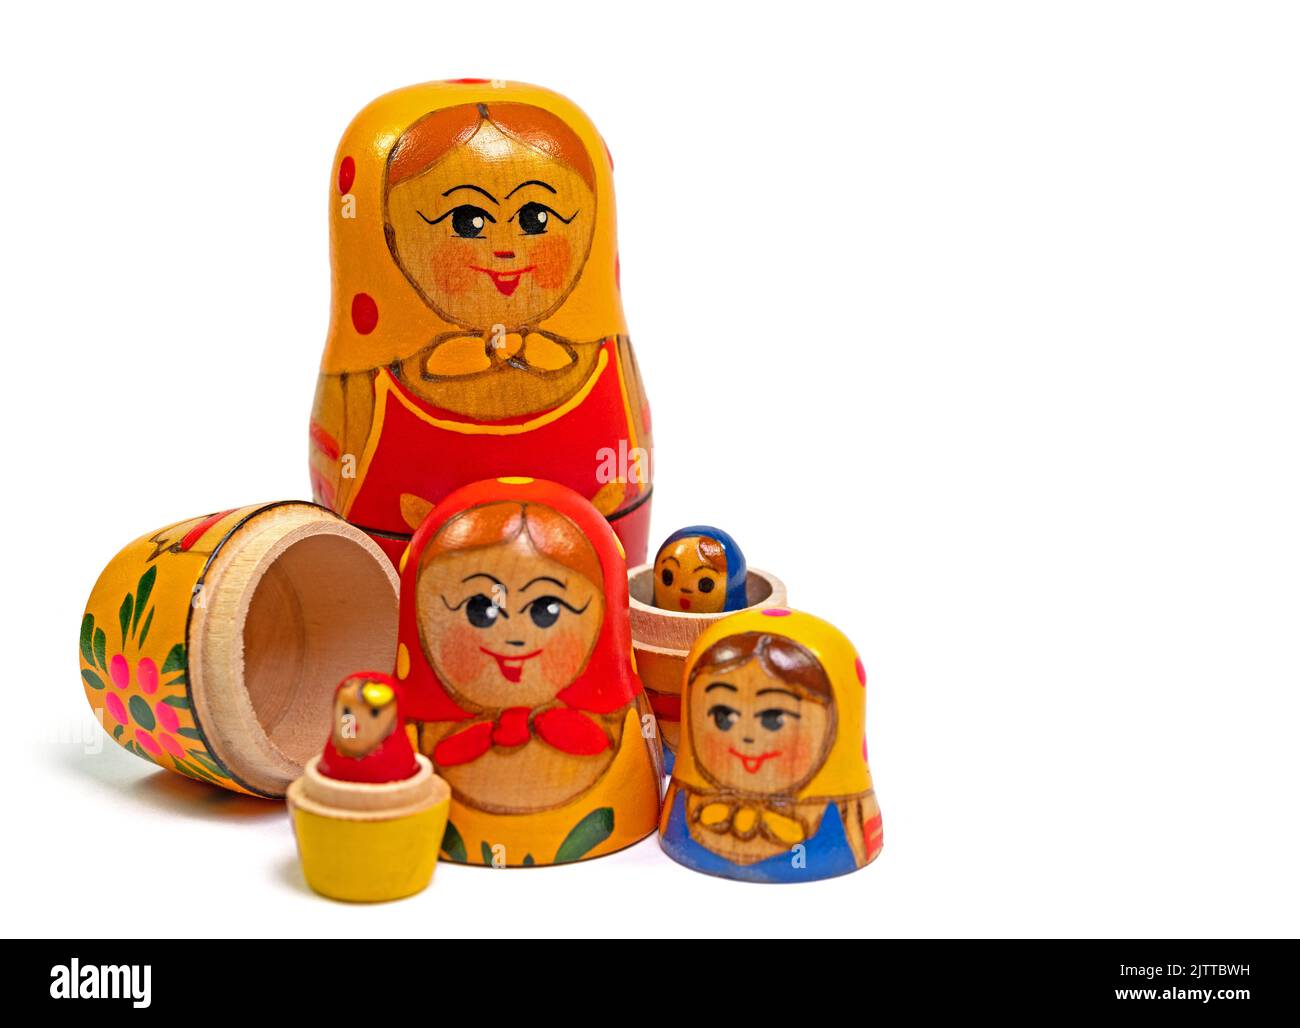 Matryoshka, hand-painted wooden dolls against a white background Stock Photo